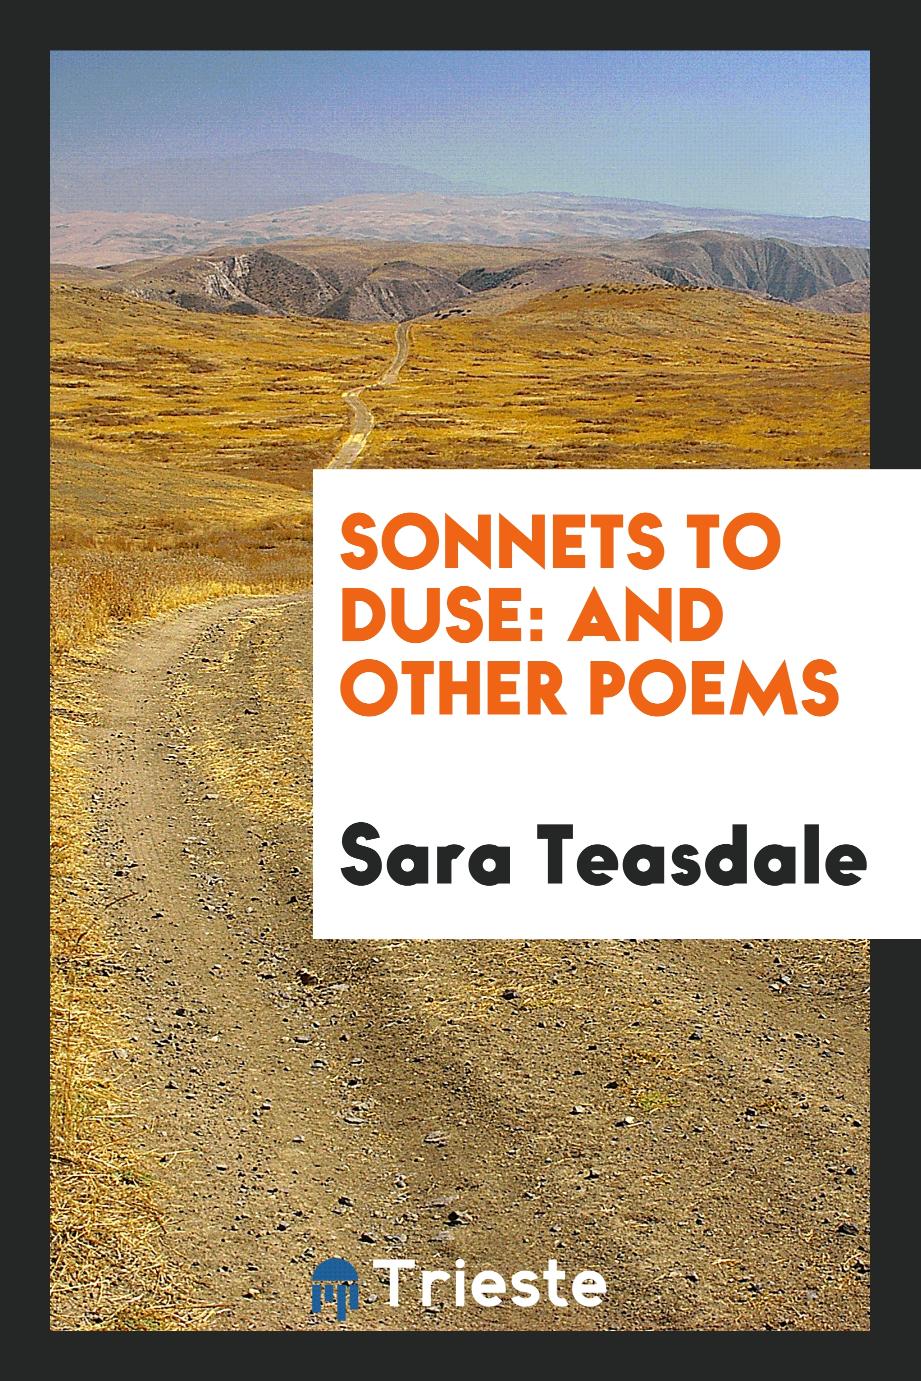 Sara Teasdale - Sonnets to Duse: And Other Poems